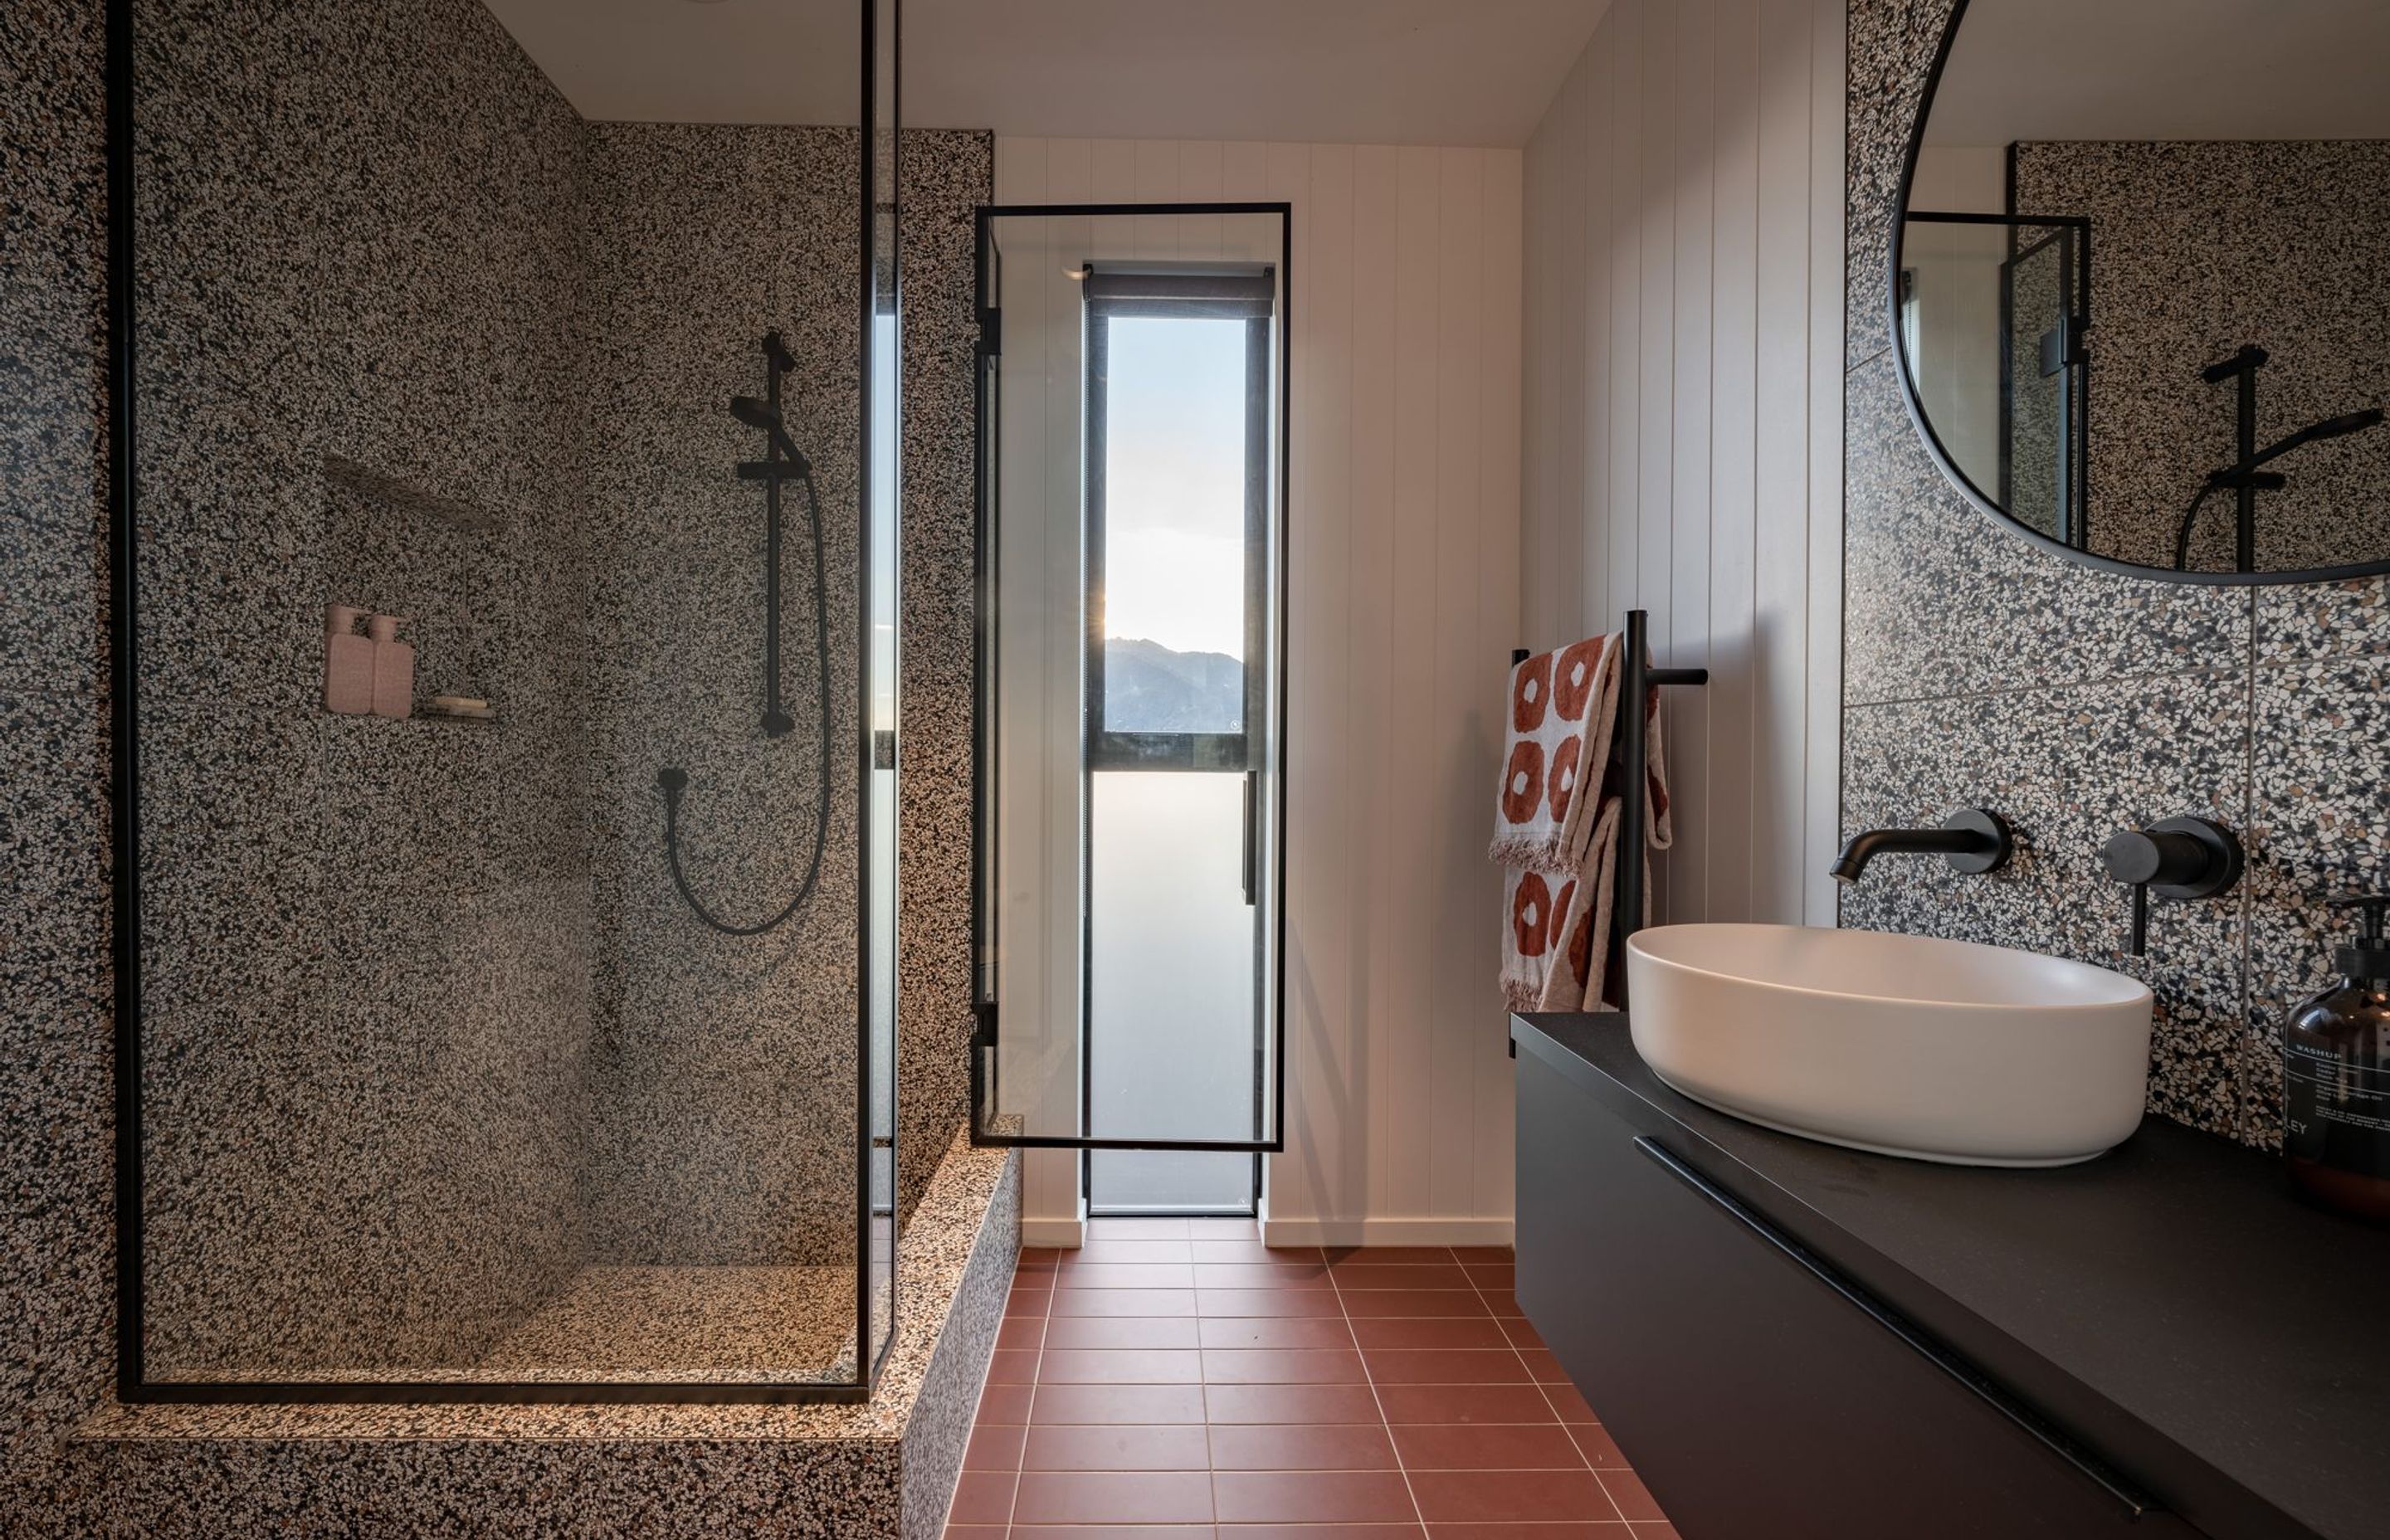 The family bathroom is far more playful, with terracotta floors, and speckled tiles, with a shub built into the shower.